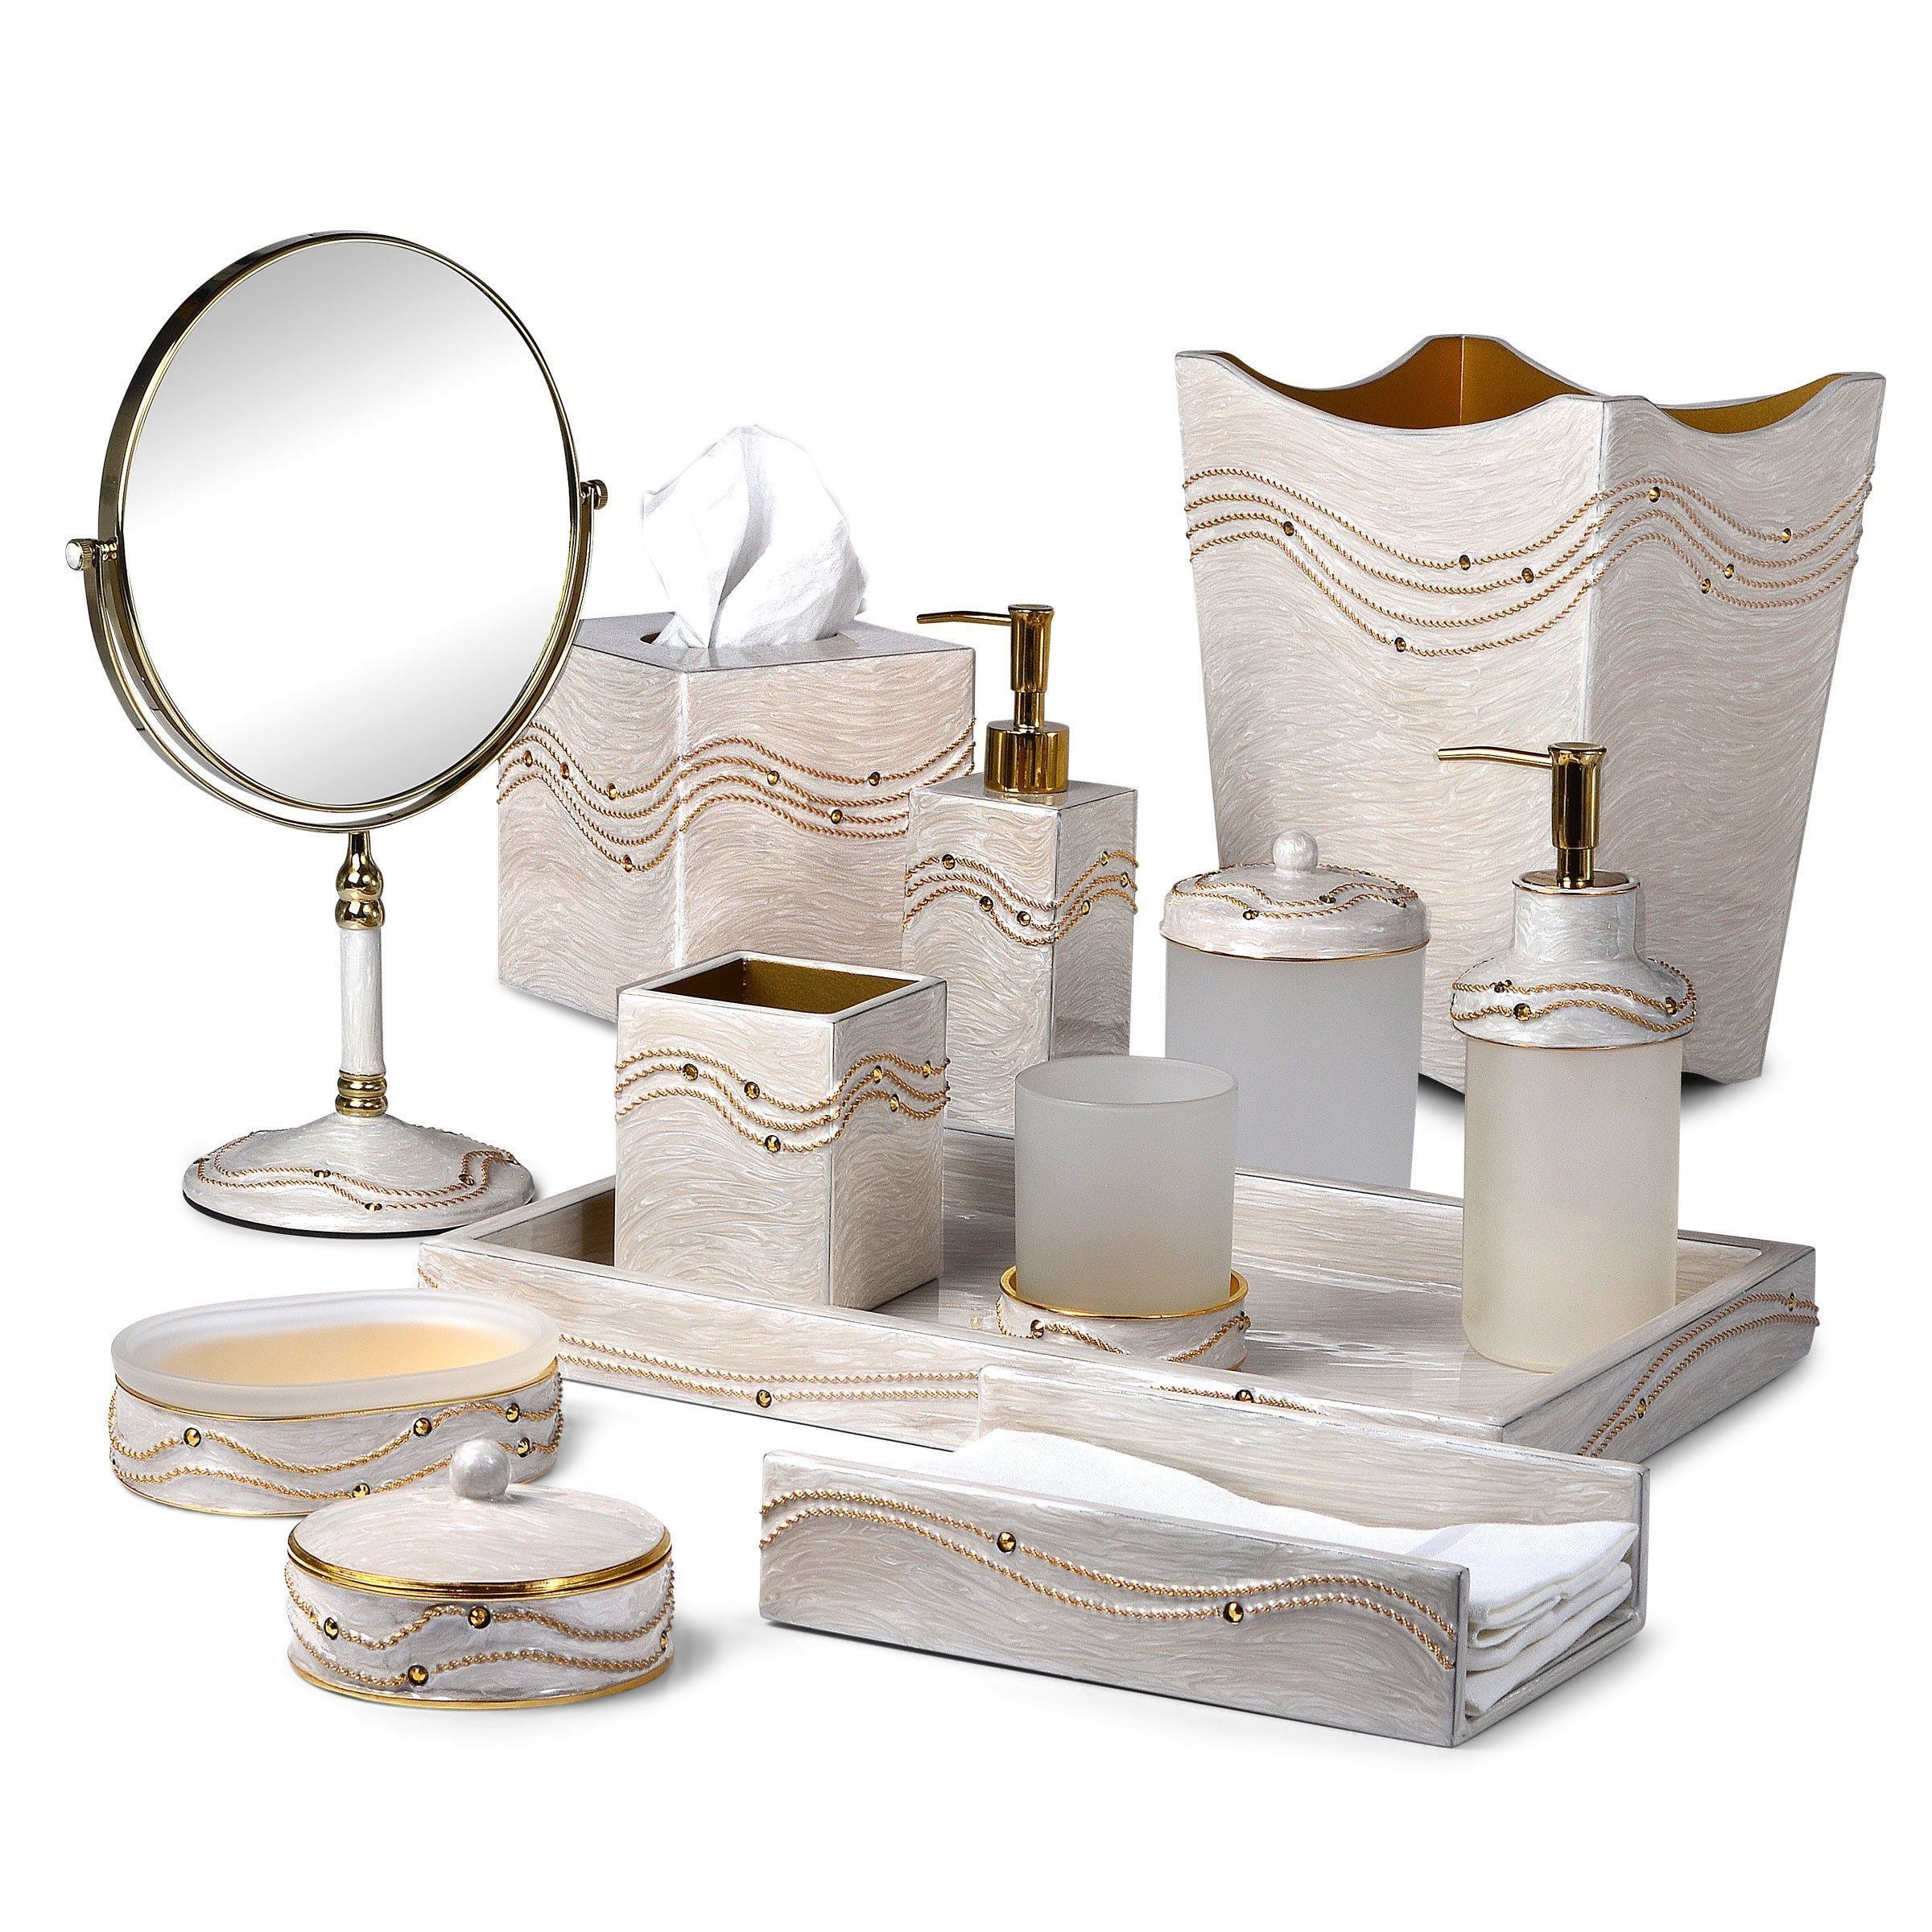 Symphony By Mike + Ally Bath Accessories